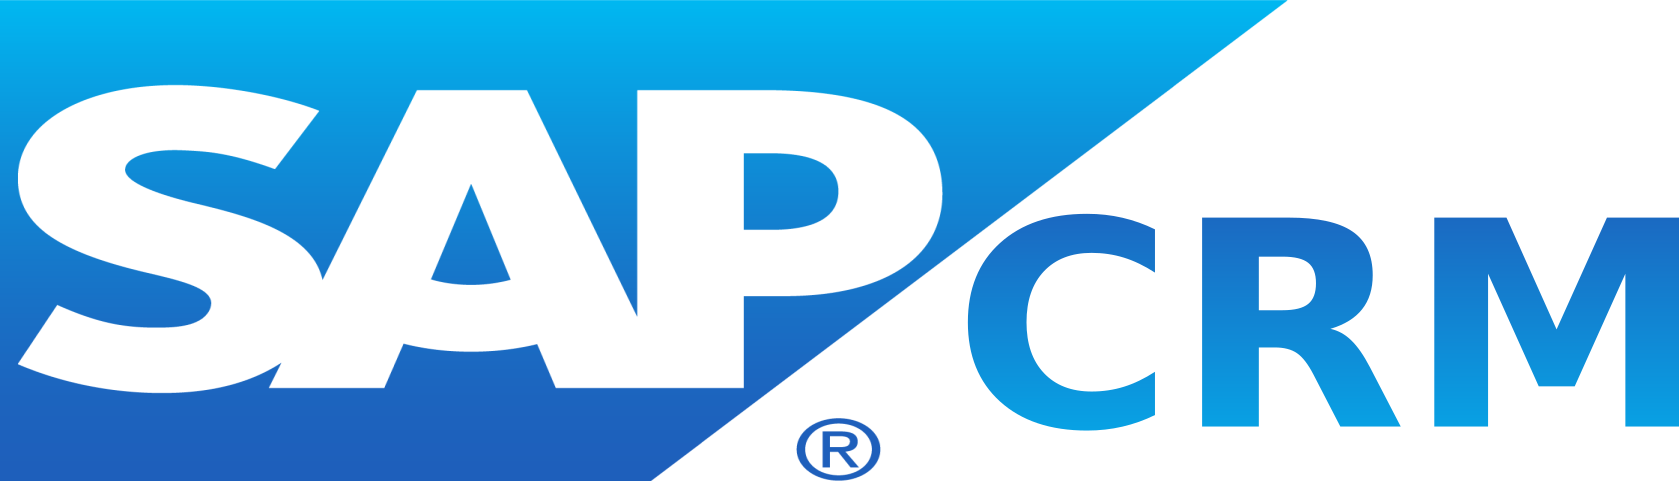 SAP CRM: review CRM software - Accurate Reviews